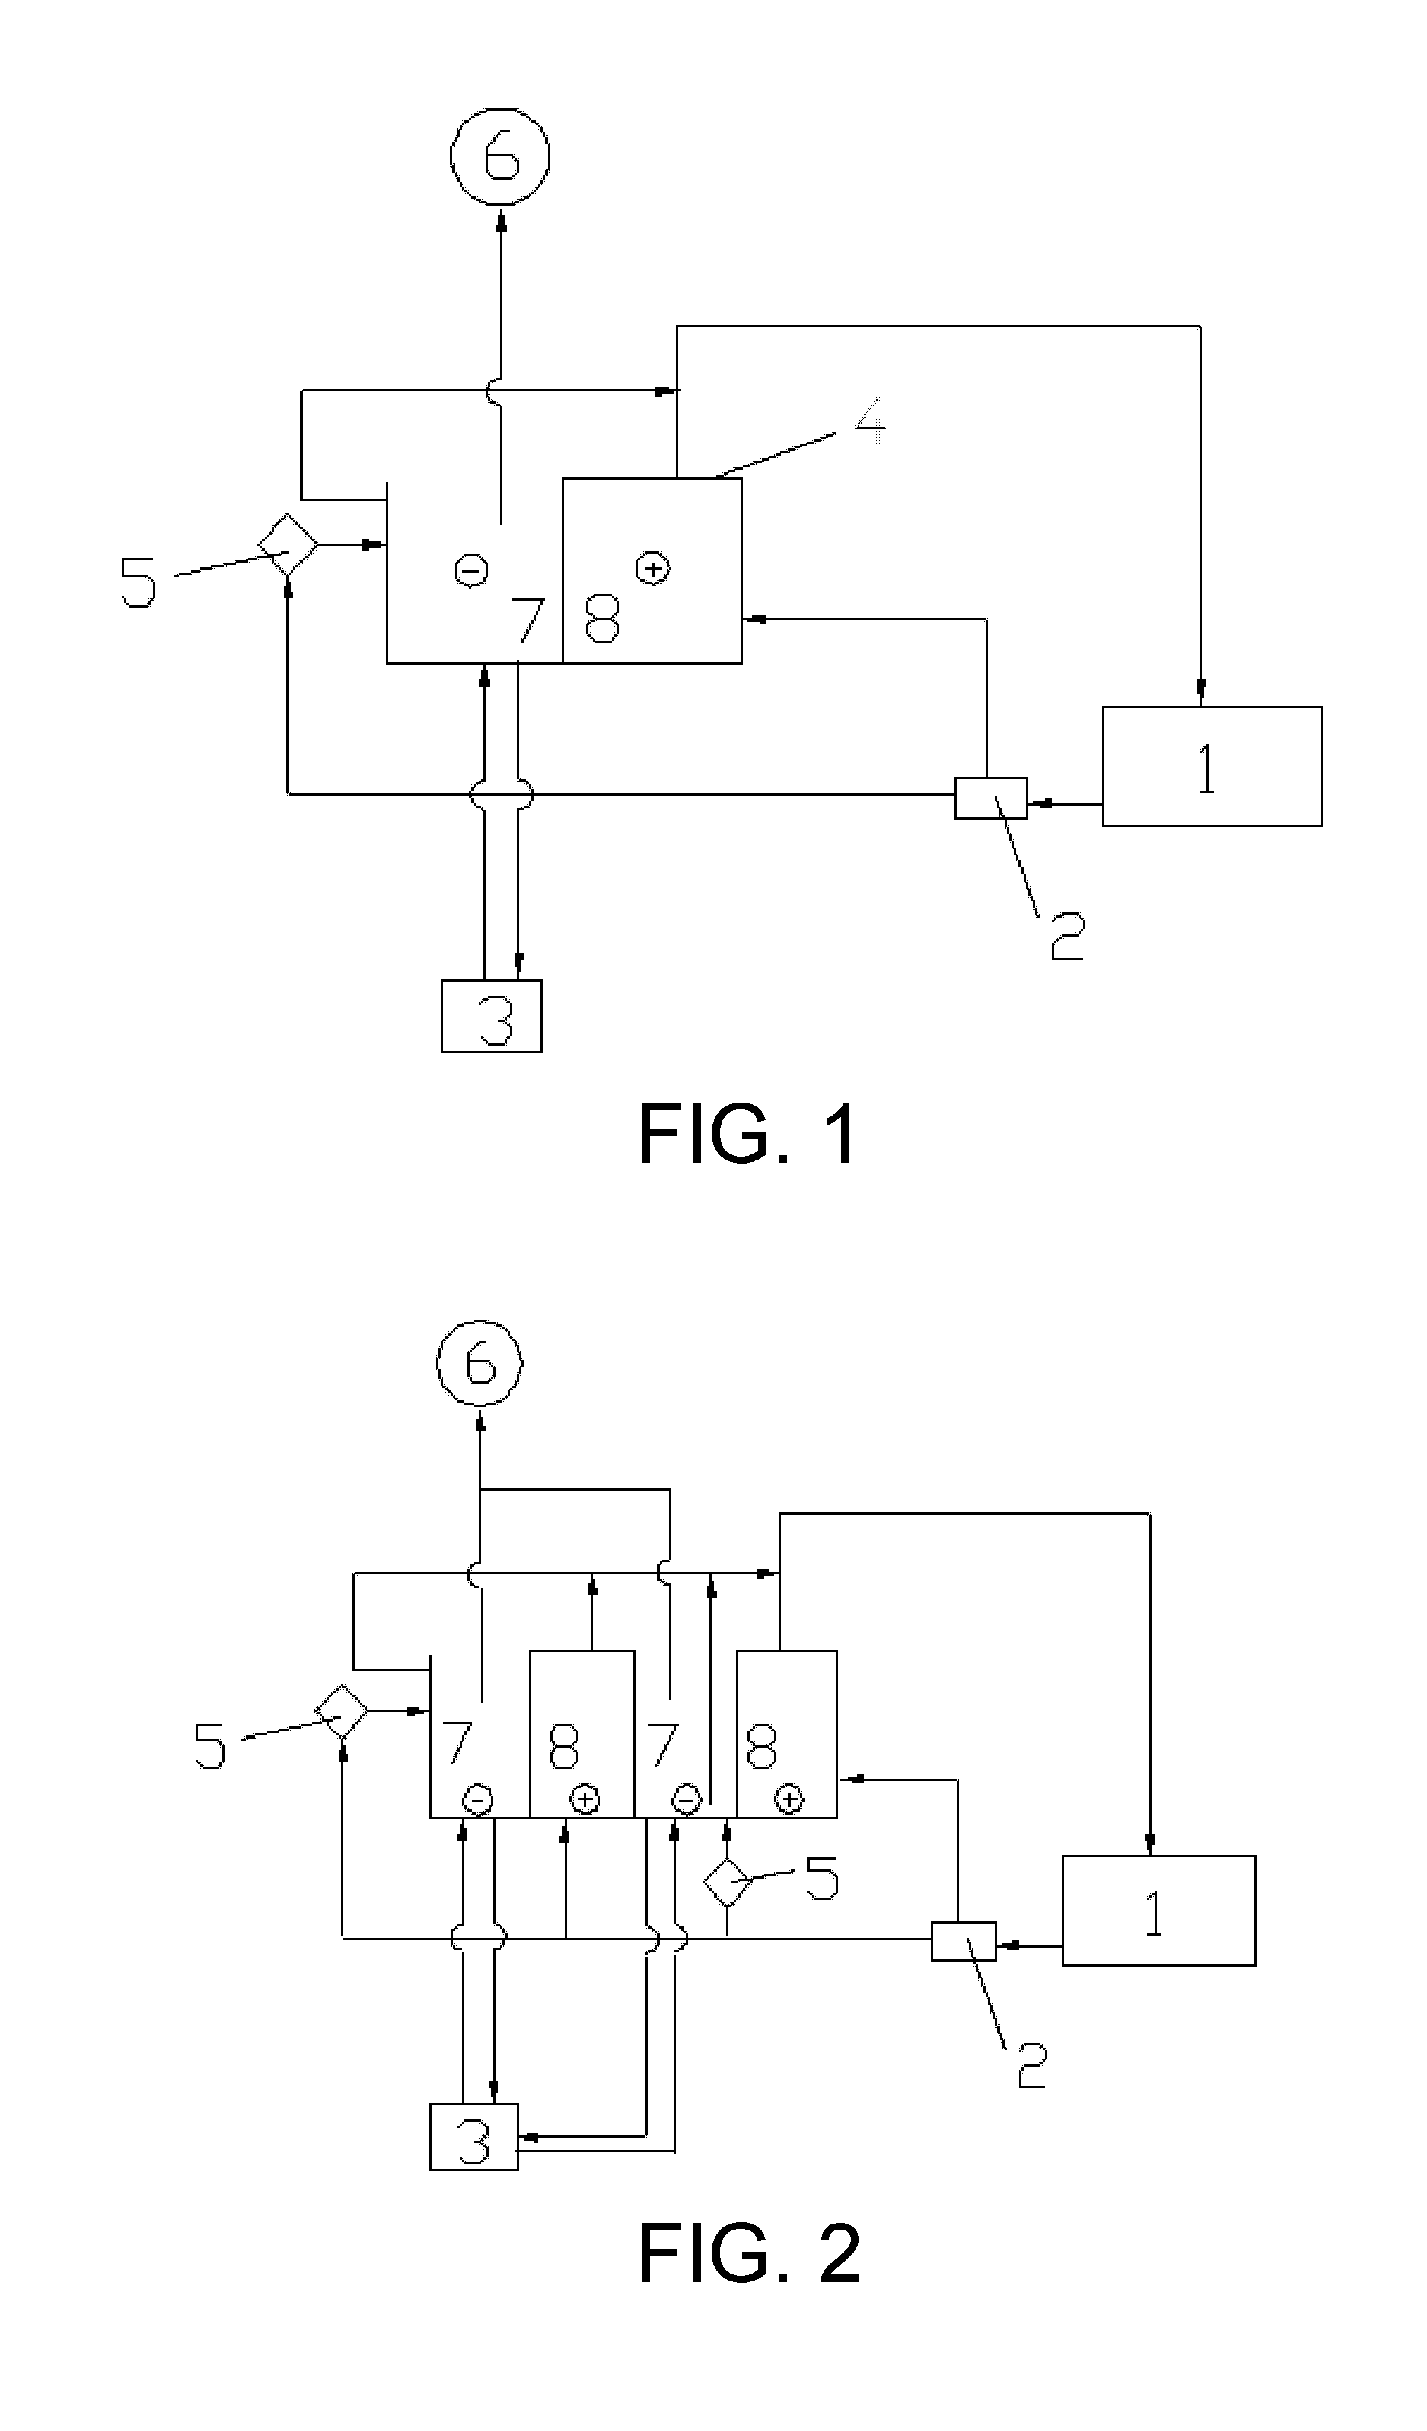 Method for electrolytic recycling and regenerating acidic cupric chloride etchants